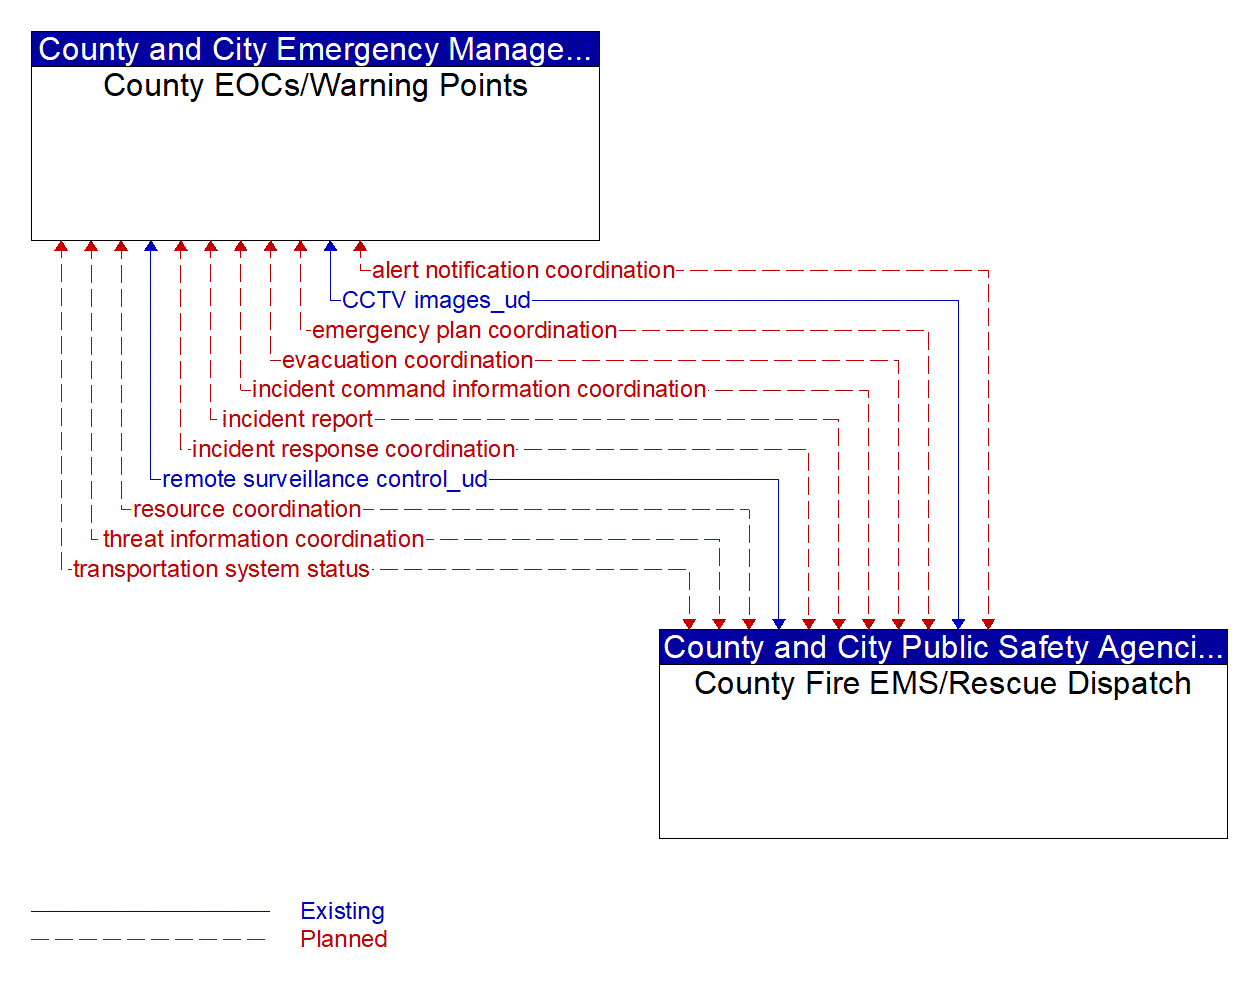 Architecture Flow Diagram: County Fire EMS/Rescue Dispatch <--> County EOCs/Warning Points